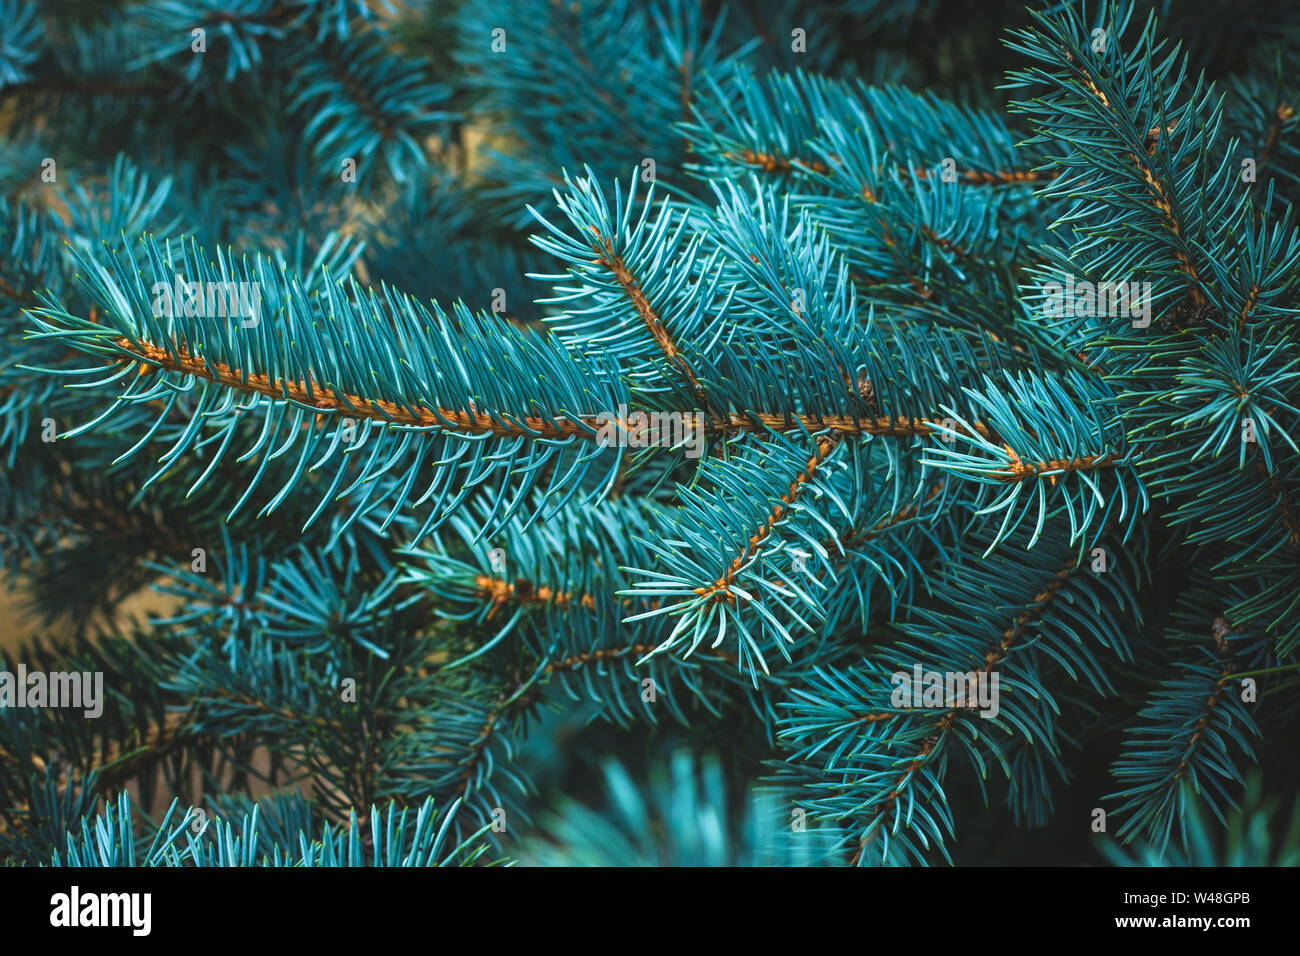 Spruce branch close-up. Green branches of fur tree. Christmas fir. Frame of blue pine branch. Coniferous needles close-up. Pine-tree background. Stock Photo